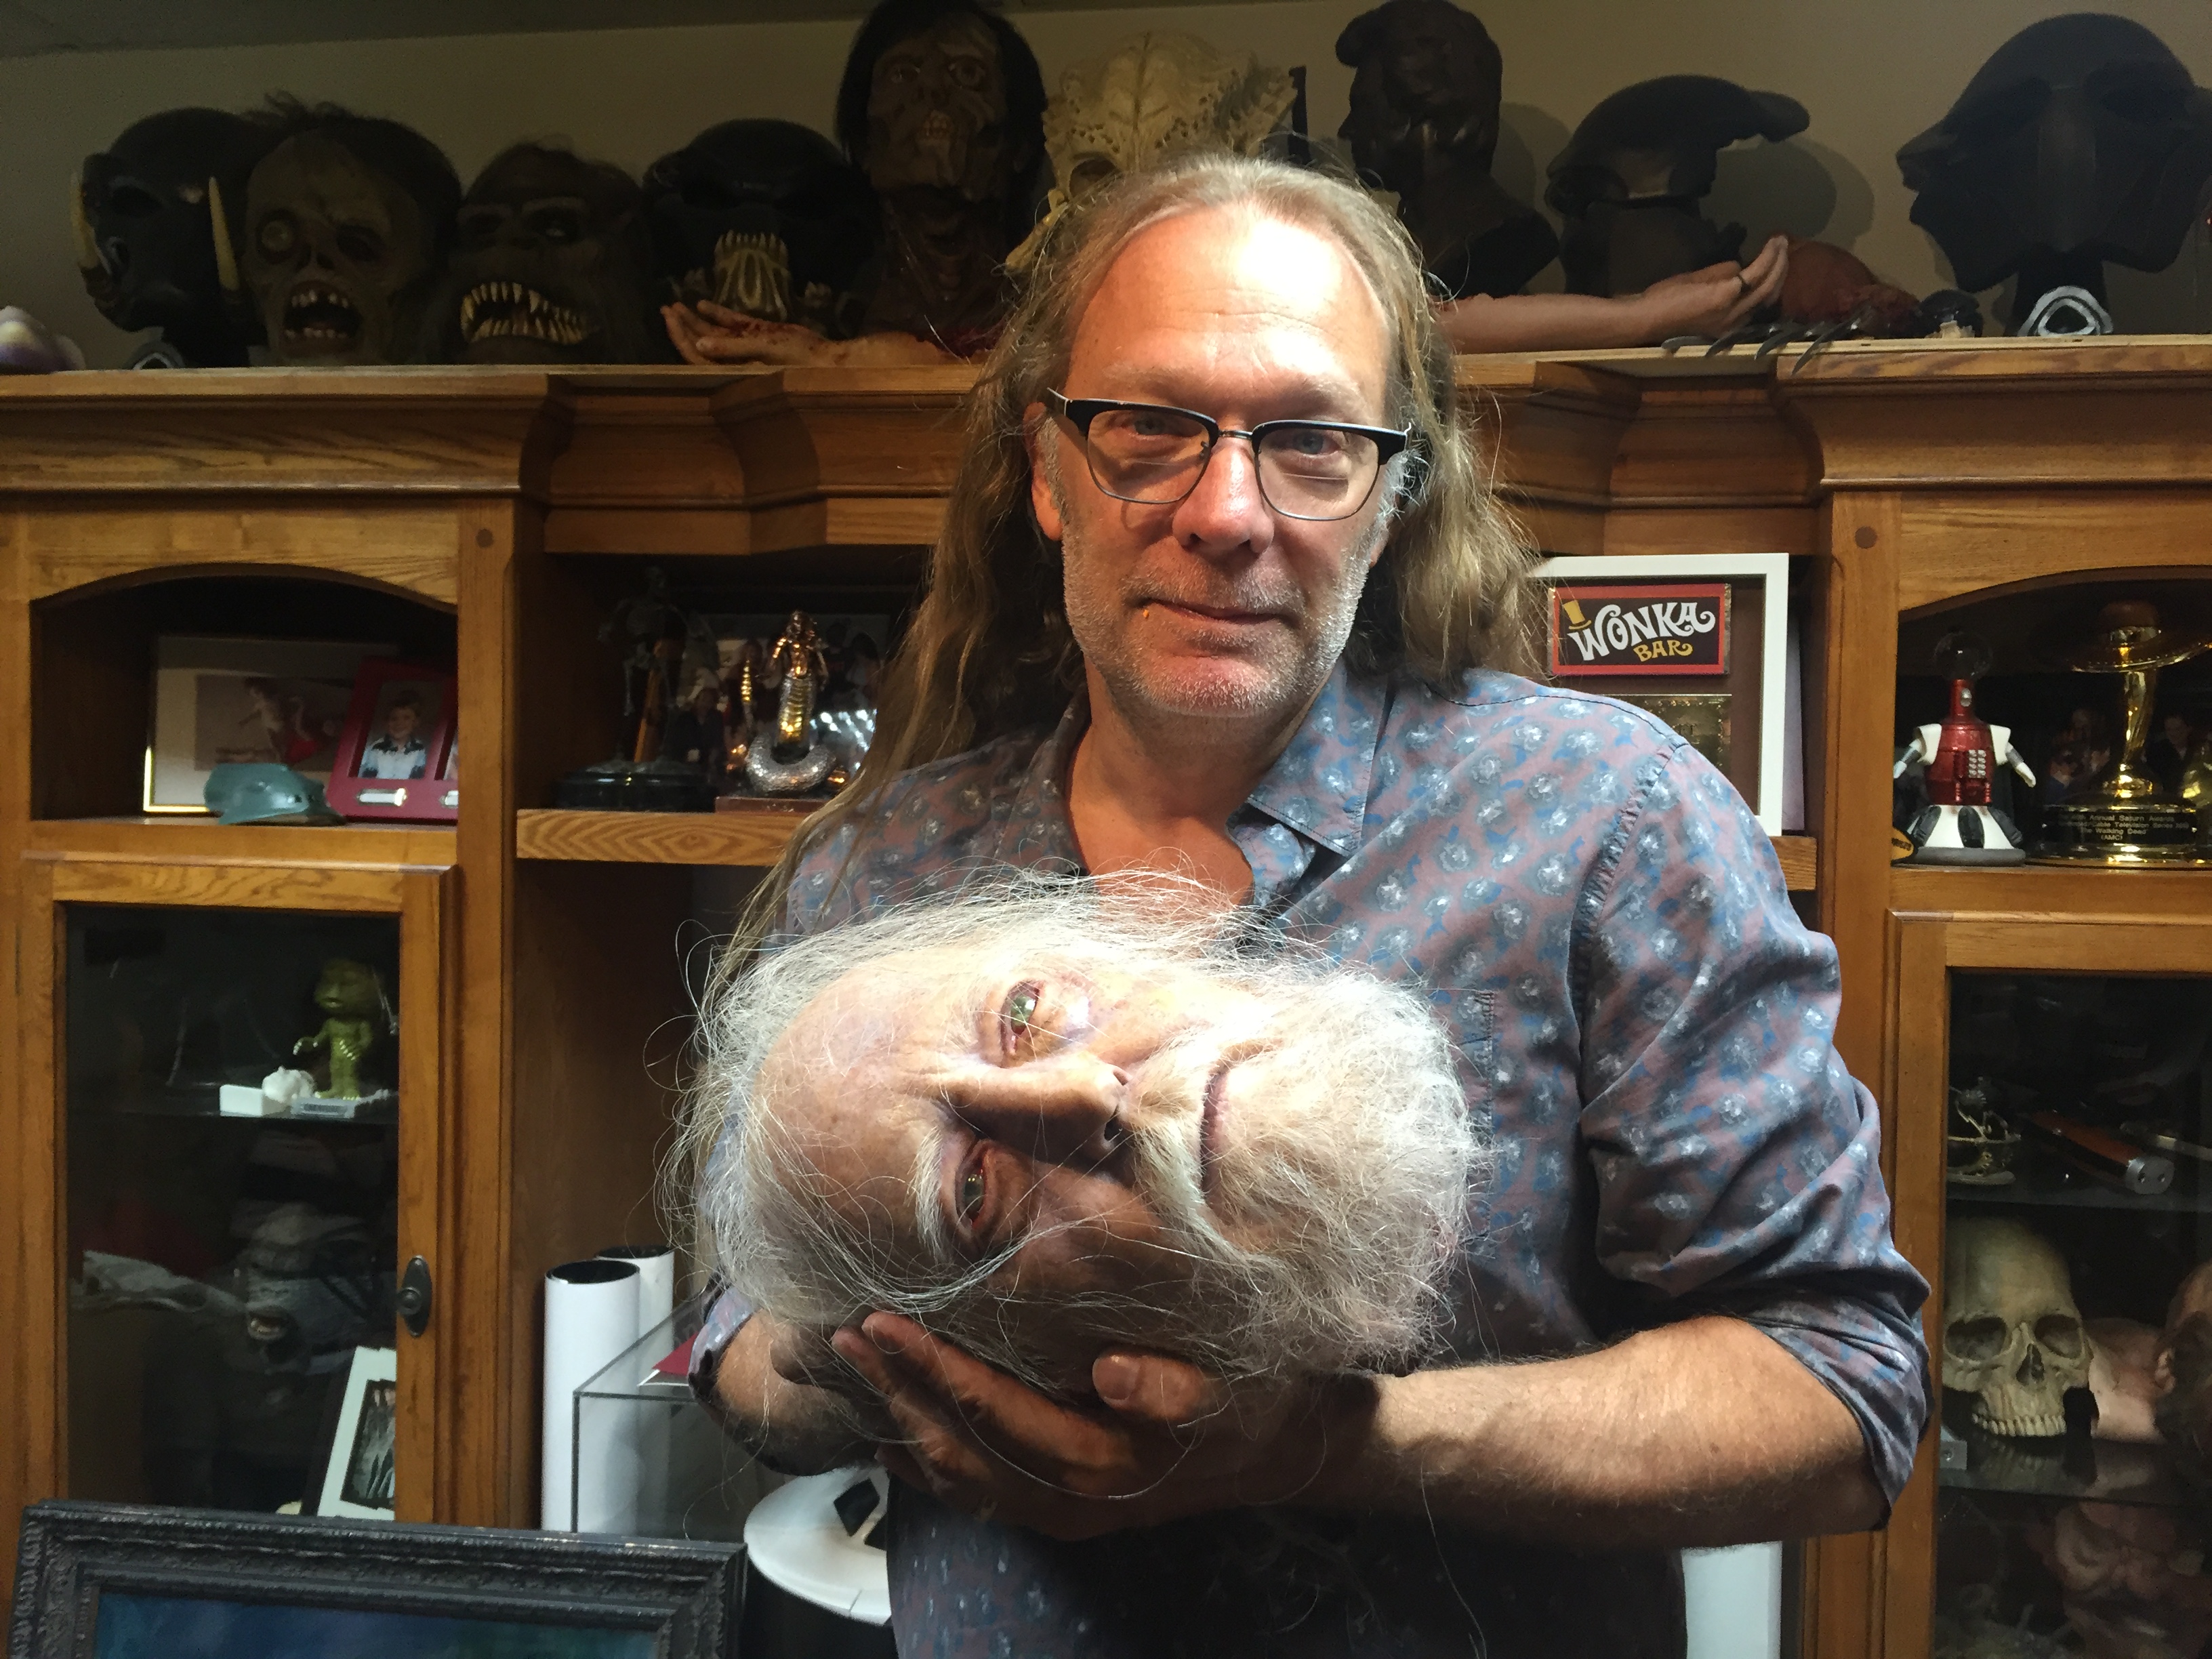 Special effects artist Greg Nicotero cradles the severed head of Hershel Greene, a character from AMC series 'The Walking Dead', as he poses for a photo at his studio KNB EFX in Chatsworth, California on June 8, 2016.  He is the God of Gore, the Sultan of Splatter, the Emperor of Entrails -- and the brains behind some of the most iconic blood and guts set-pieces in film history. If you've seen something in a violent movie that made the blood drain from your face, there's a good chance that Oscar-winning Greg Nicotero provided the special effects.  / AFP PHOTO / Frankie TAGGART